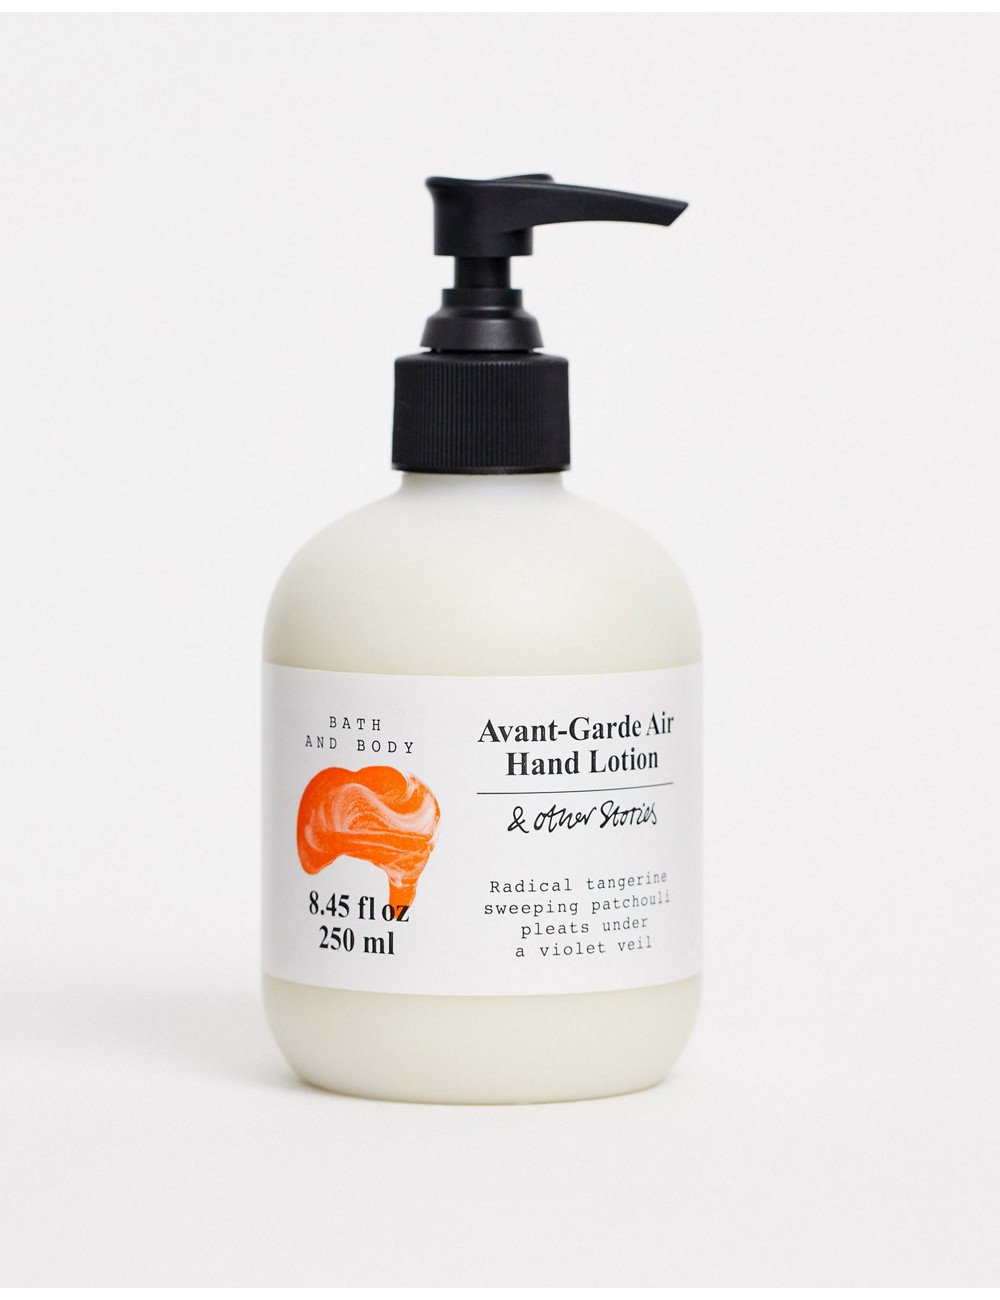 & Other Stories hand lotion...